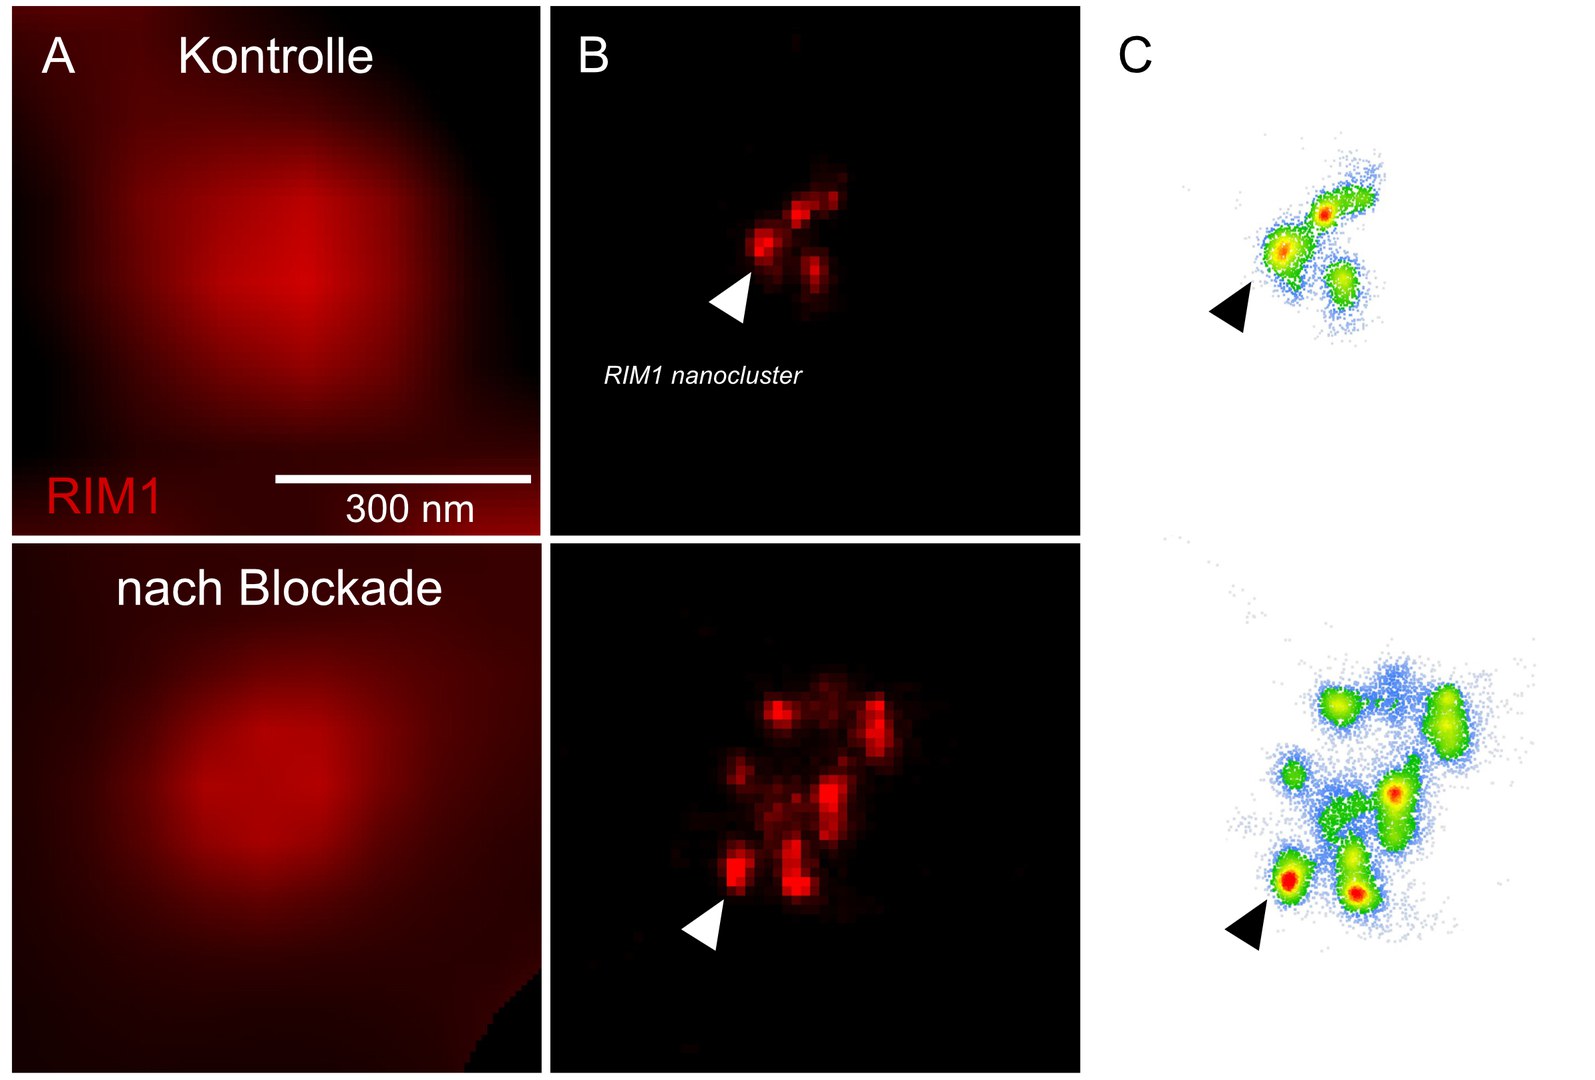 Plasticity of neuronal communication elicited by 48-hour blockade of neuronal activity correlates with the number of RIM molecular clusters in the active zone. Column A is imaged with widefield illumination; column B is imaged with dStorm microscopy; column C shows molecular clusters.